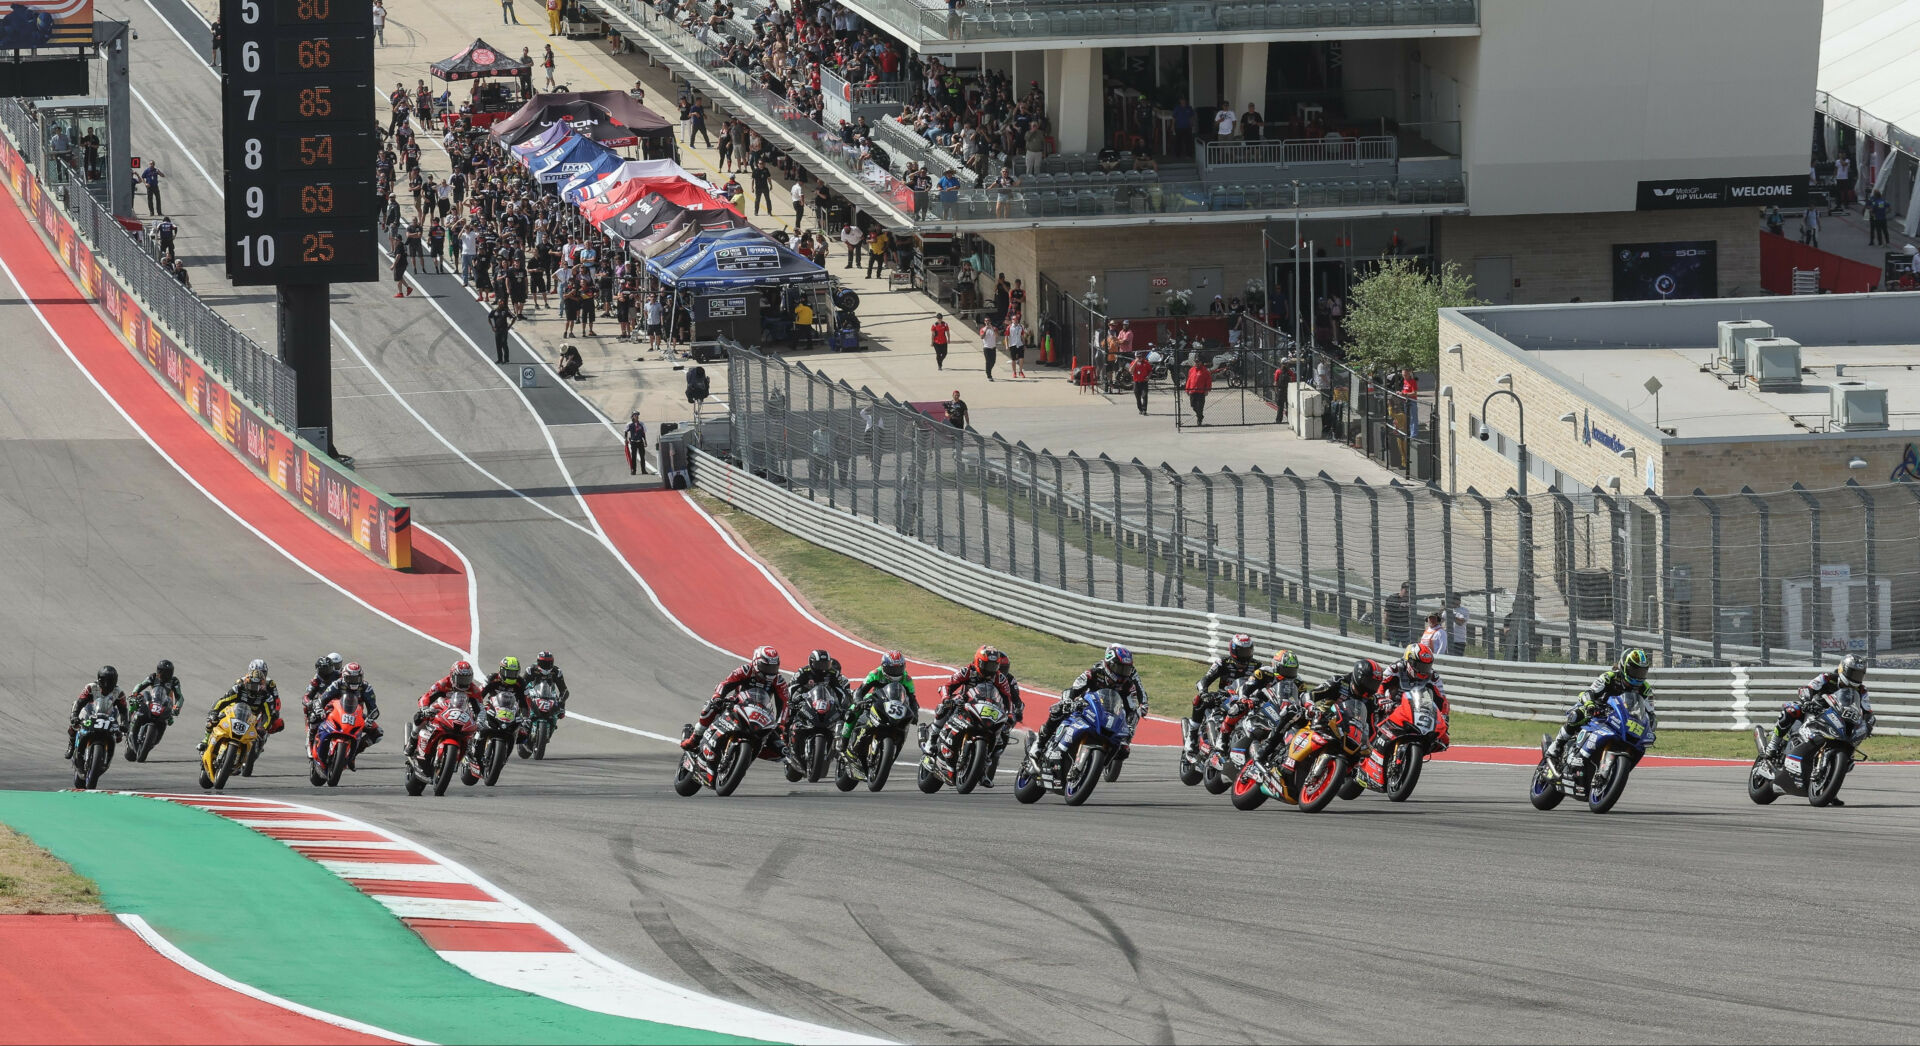 The start of a MotoAmerica Superbike race at COTA in 2022. Photo by Brian J. Nelson.